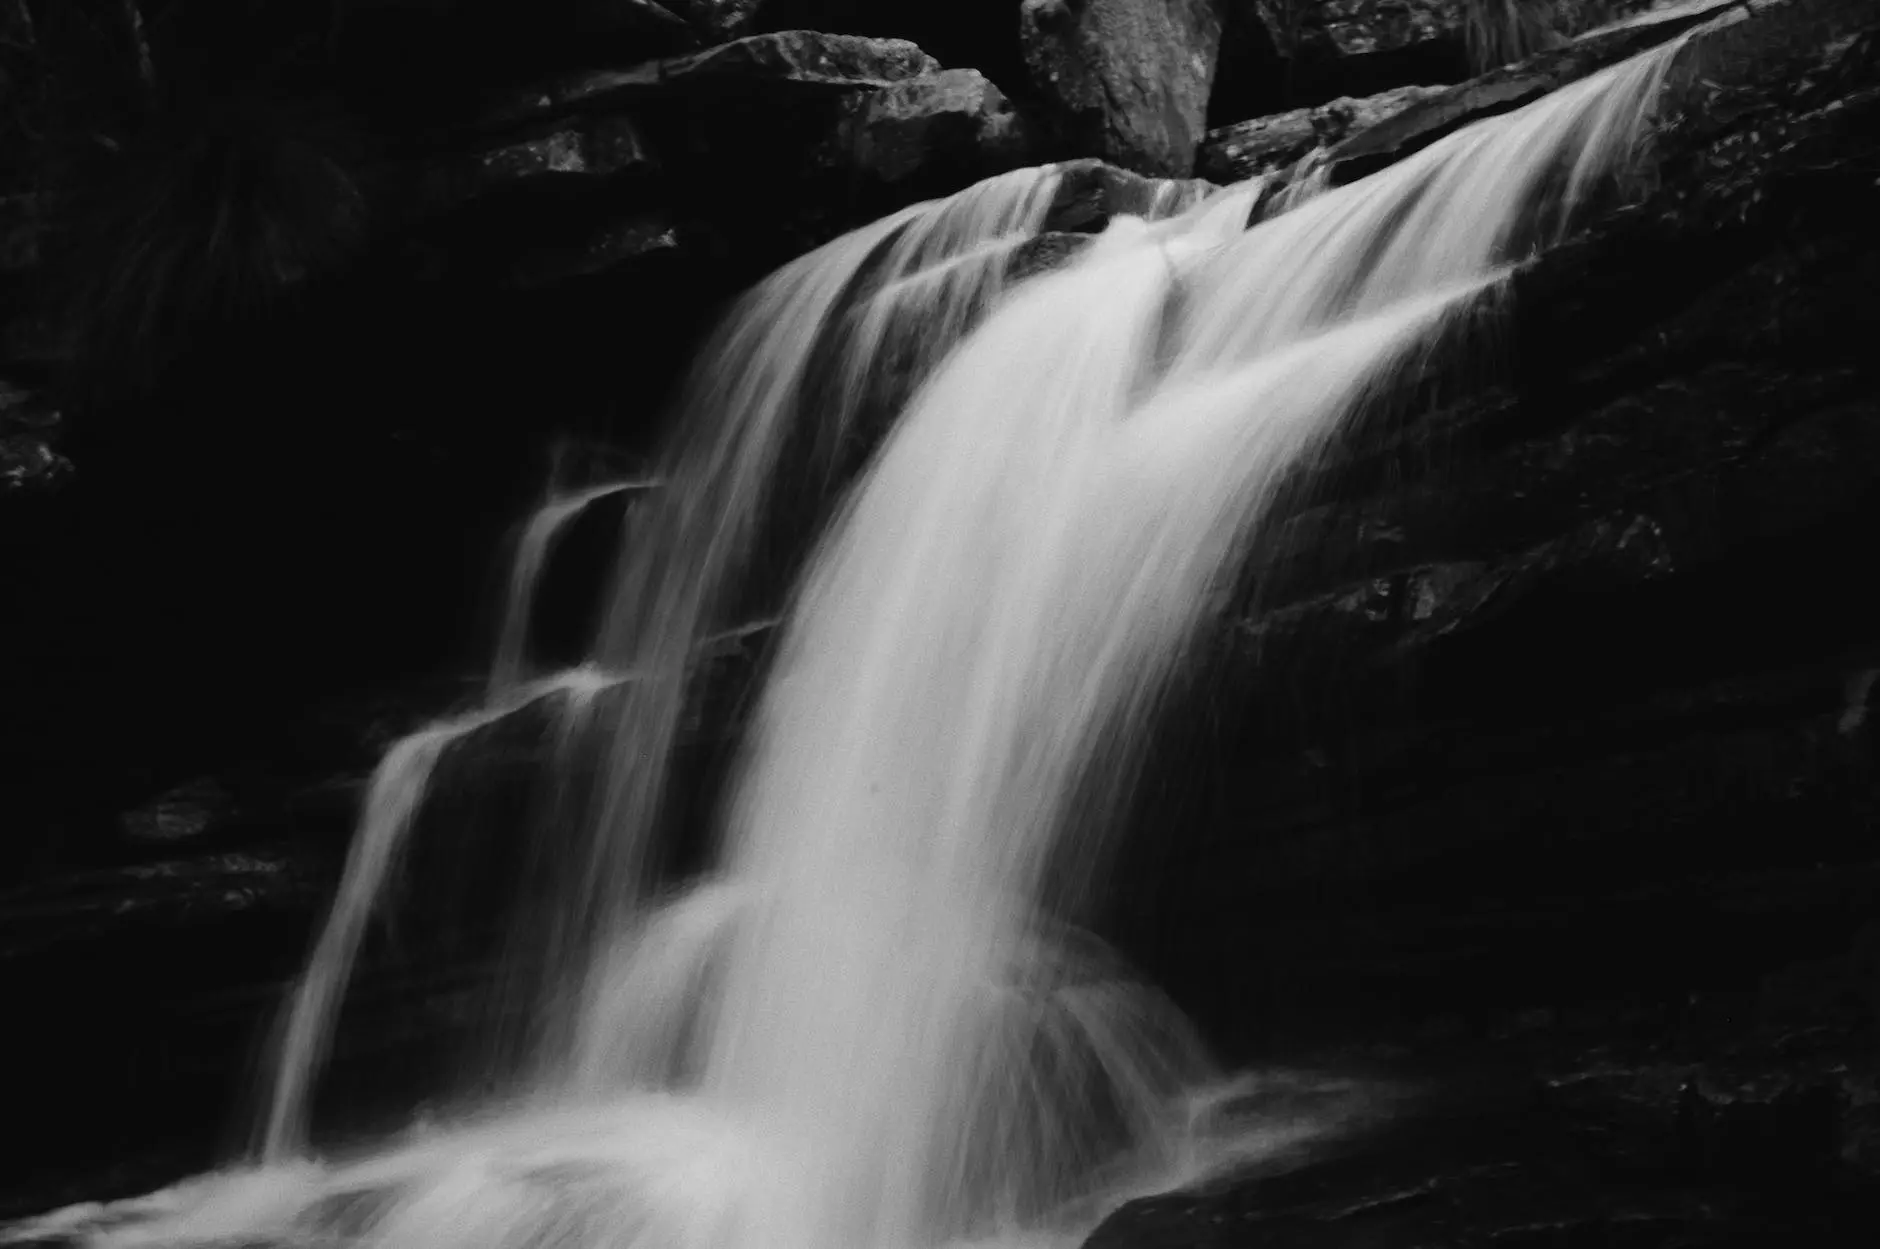 grayscale photography of running water